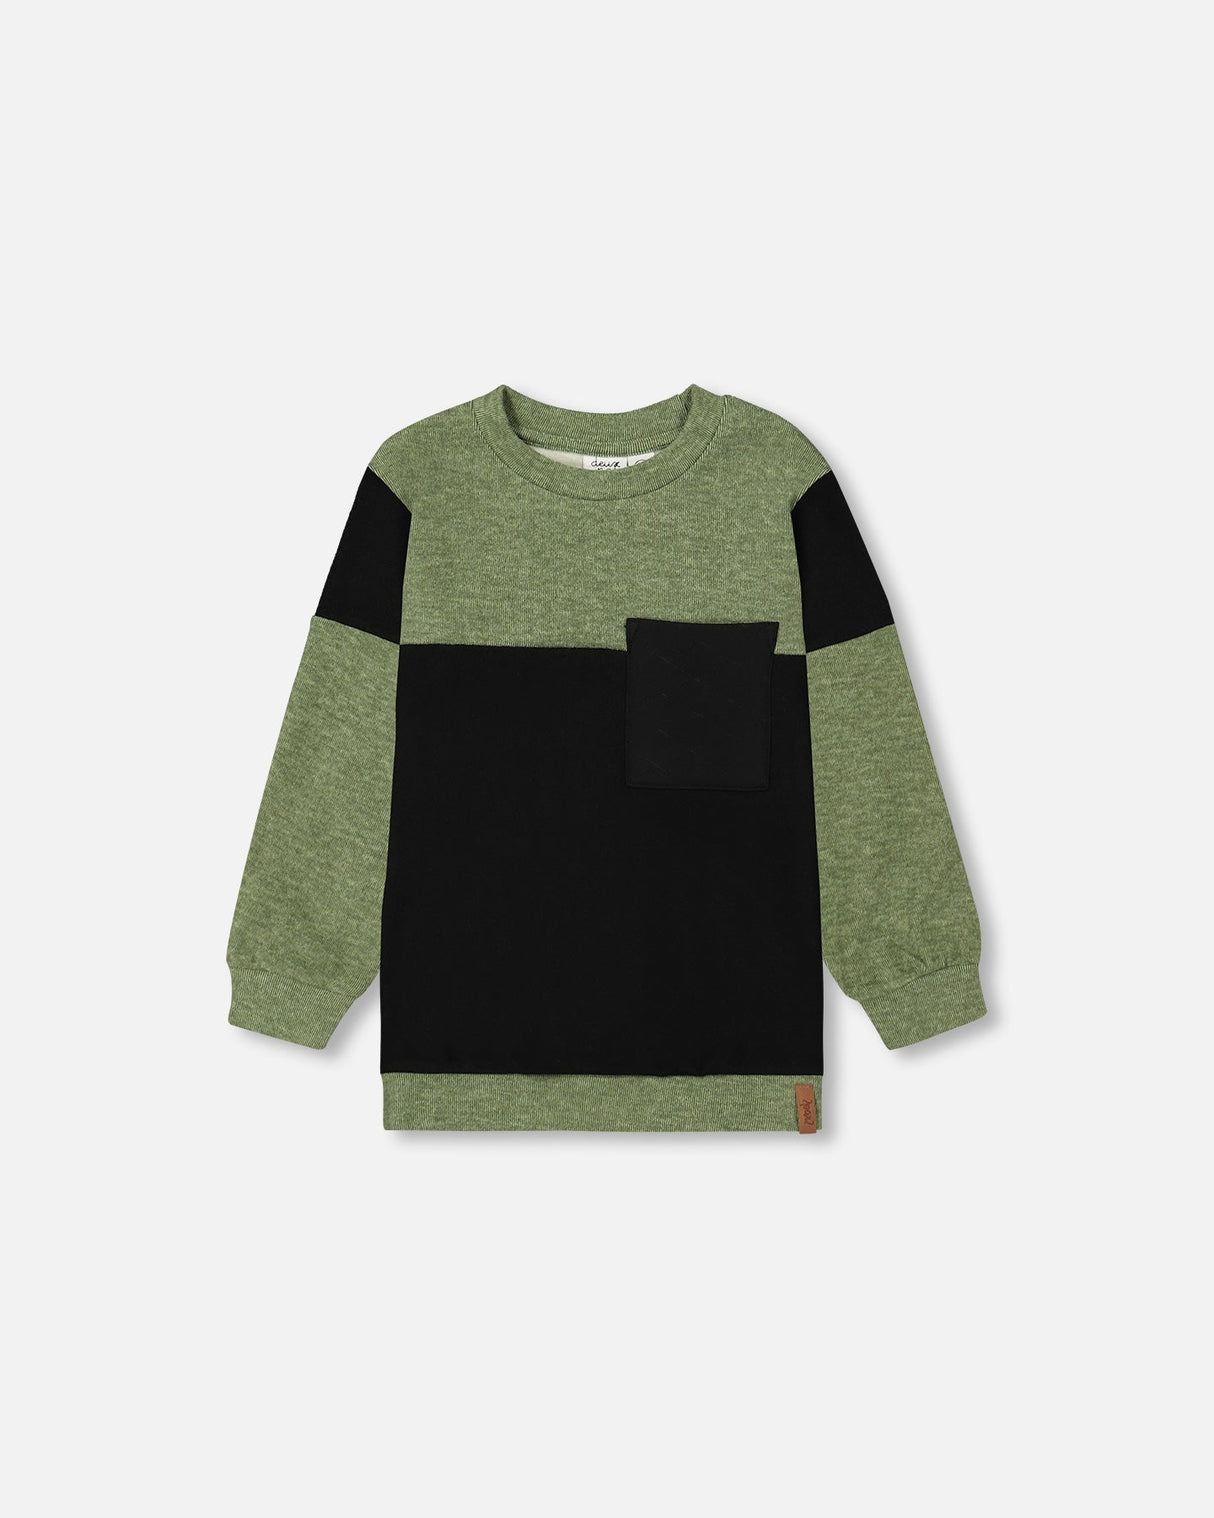 Super Soft Brushed Rib Top Black And Ivy Green-0